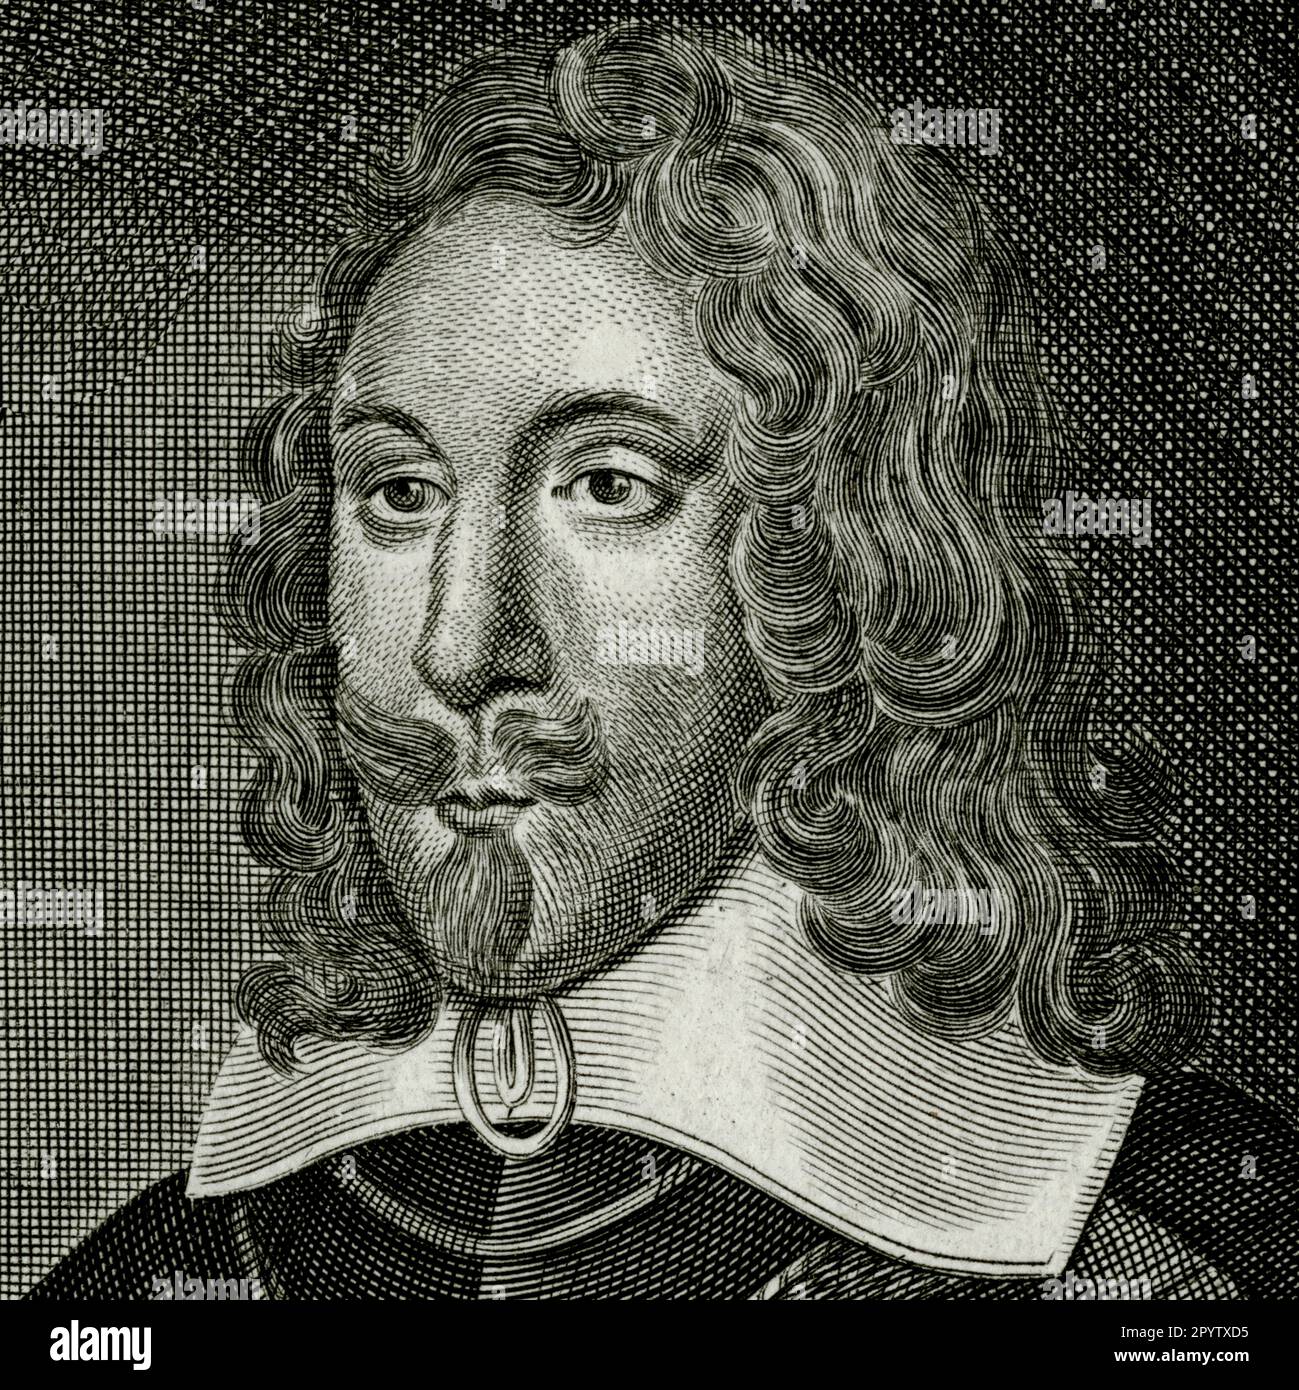 Edward Montagu (1602-1671), Baron Kimbolton and 2nd Earl of Manchester, Major-General of Parliament's Eastern Army in the first English Civil War and Parliament's Supreme Commander at the 1644 Battle of Marston Moor. Square detail of engraving created in the 1700s by Michael Vandergucht (1660-1725). Stock Photo